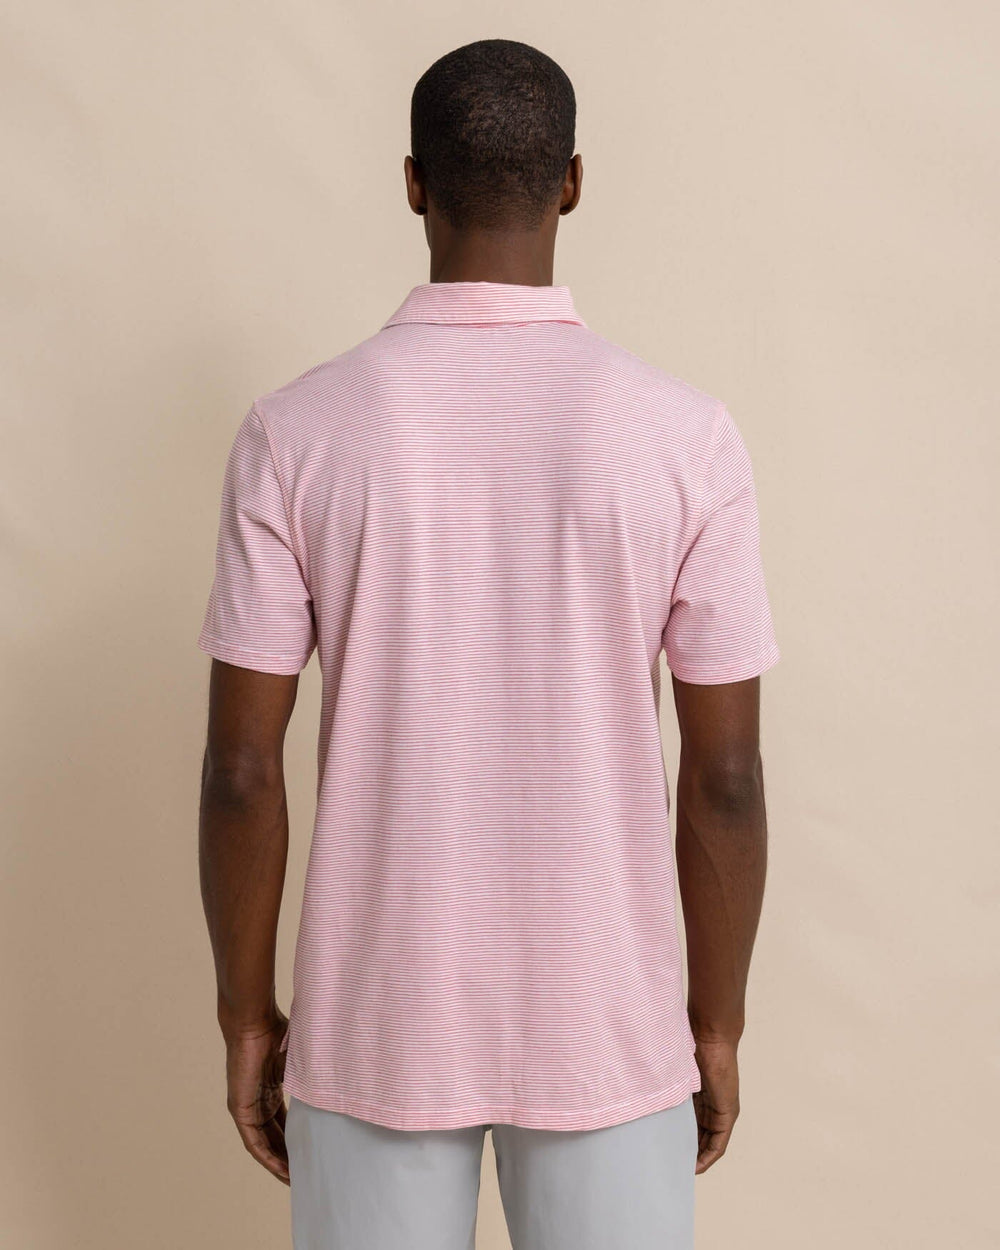 The back view of the Southern Tide The Seaport Davenport Stripe Polo by Southern Tide - Teaberry Pink